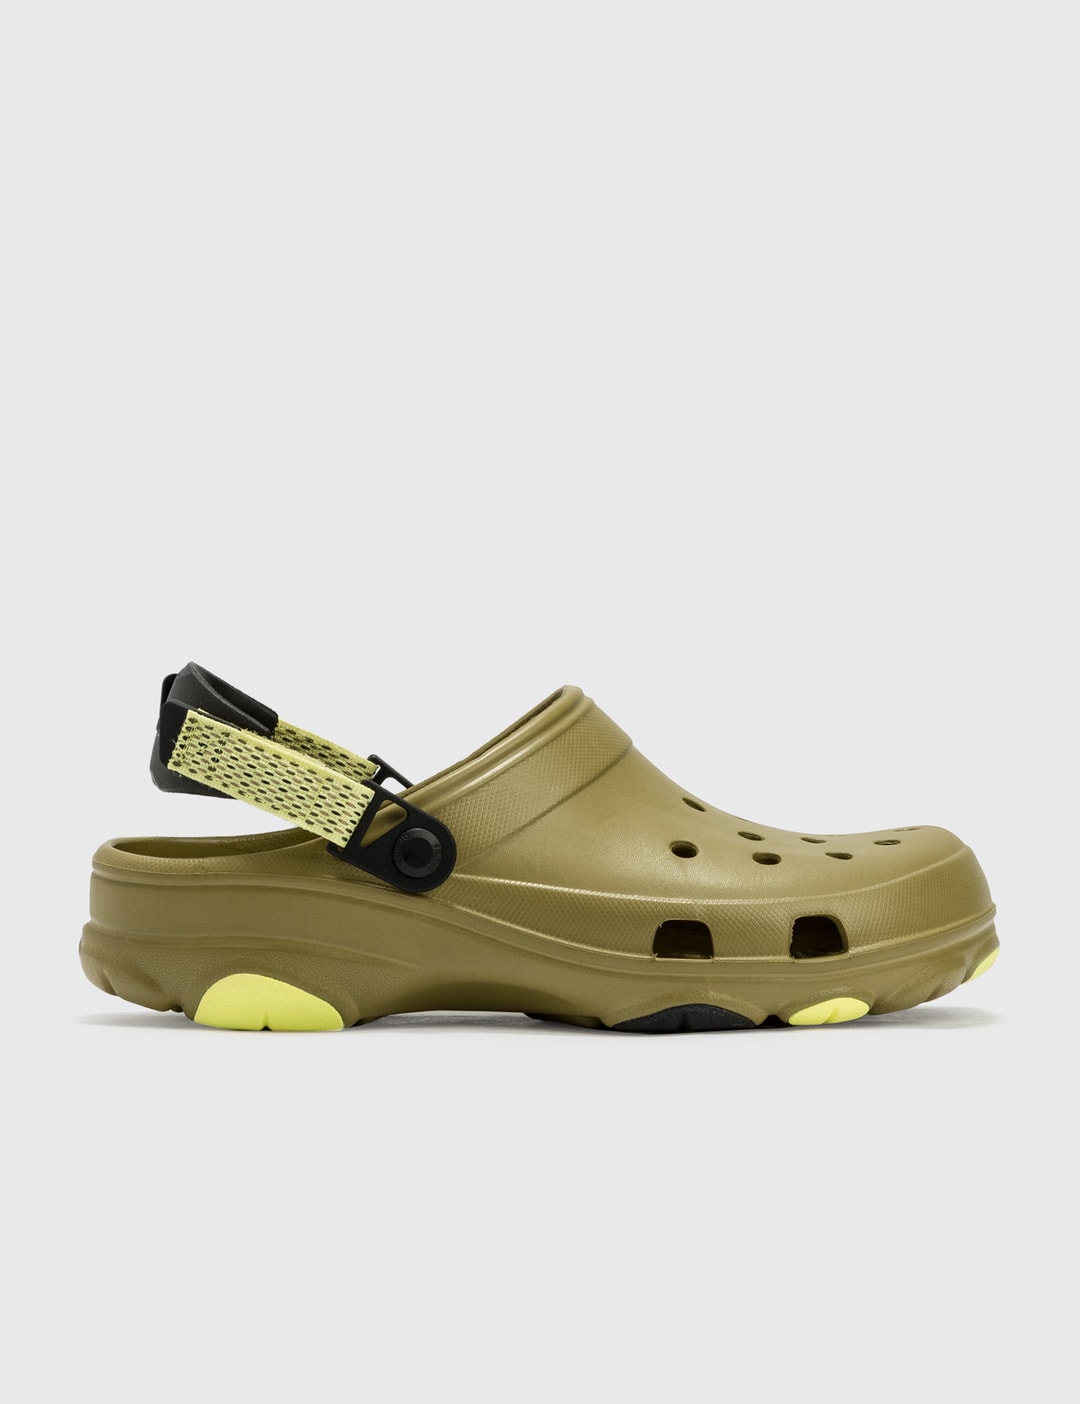 Crocs - Classic All Terrain Clog | HBX - Globally Curated Fashion and  Lifestyle by Hypebeast